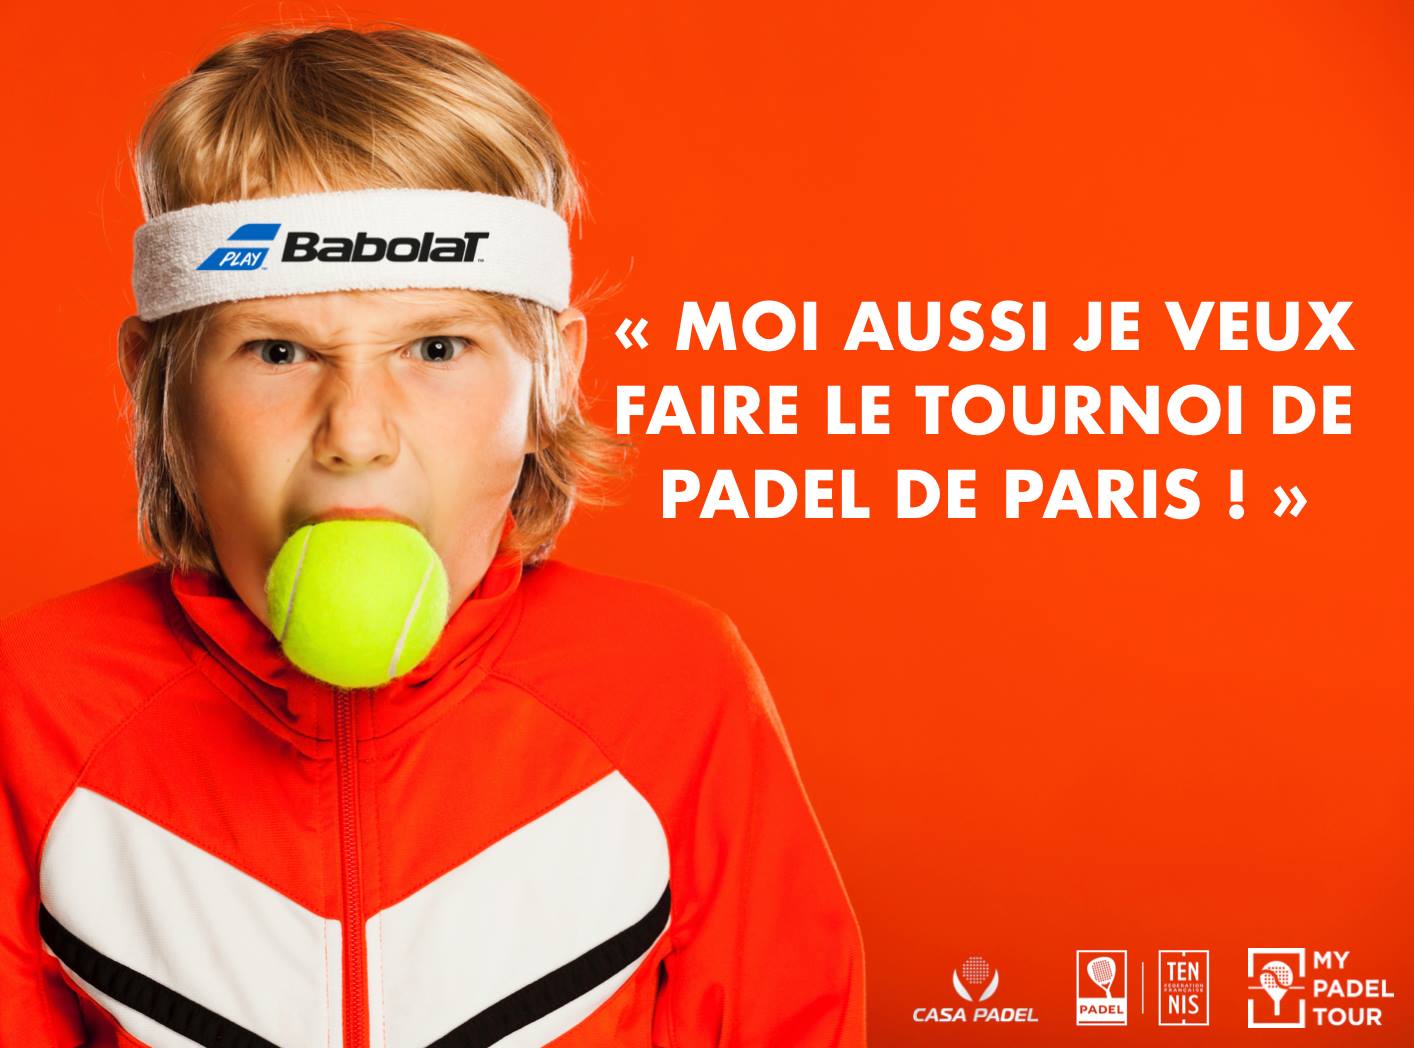 My Padel Tour launches a YOUTH tournament